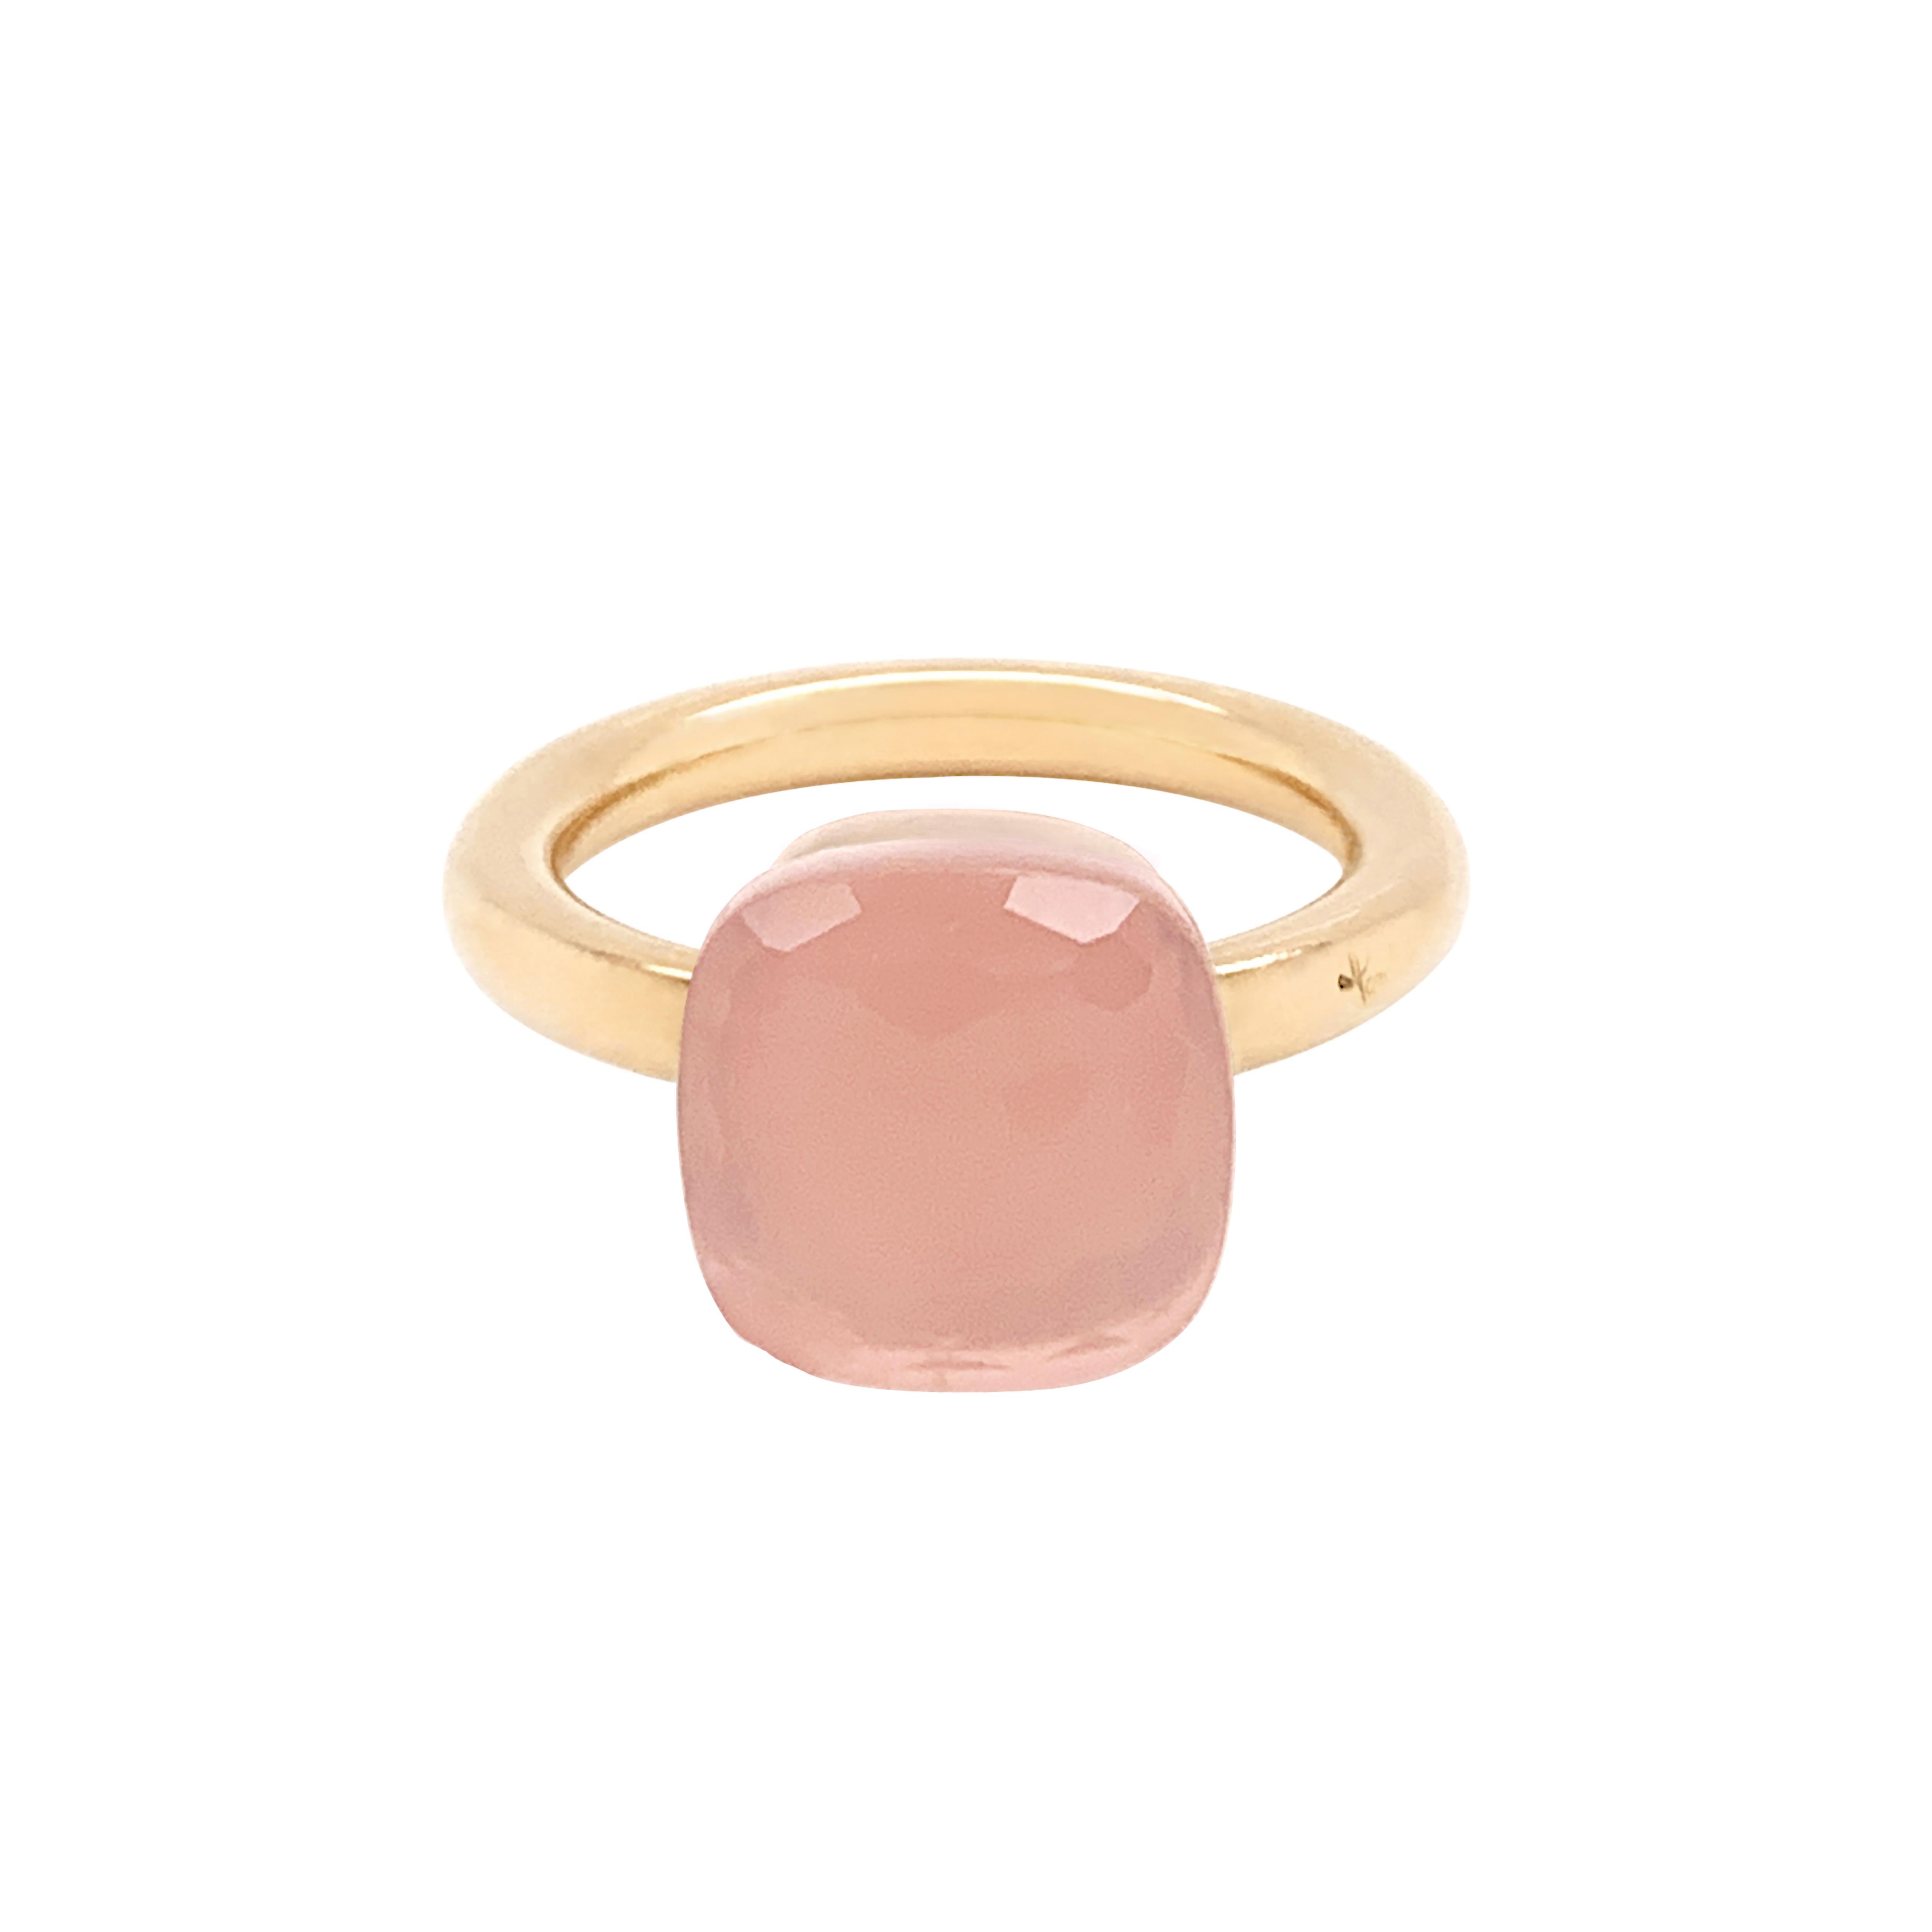 From the classic Pomellato 'Nudo' collection, a beautiful Rose quartz measuring approximately 10mm x 10mm and weighs approximately 5.00 carat mounted in 18 carat rose gold. The ring features the classic Pomellato signature and hallmarks. UK finger